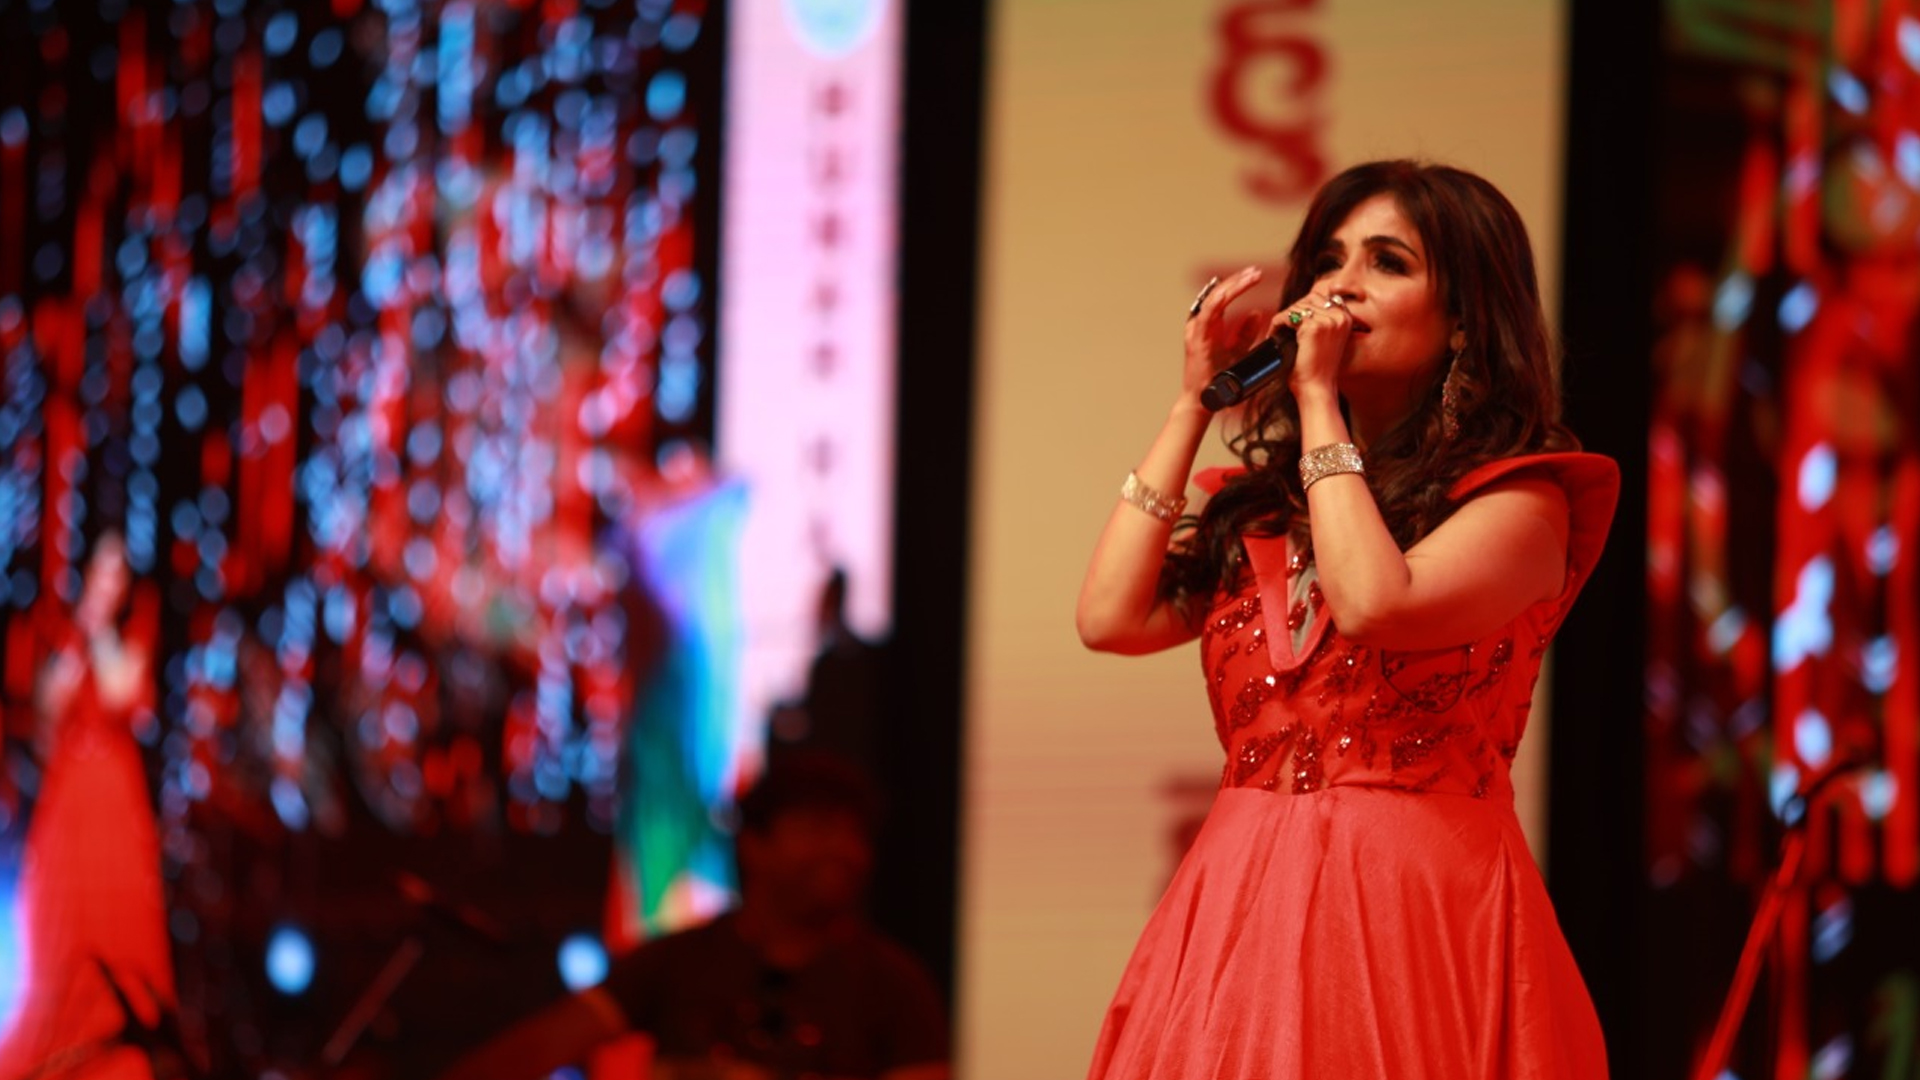 Renowned Bollywood singer and performer Shibani Kashyap performed live for Ministry of Minority Affairs, Government of India’s grandest fiesta “Hunar Haat” in the presence of Shri Mukhtar Abbas Naqvi.